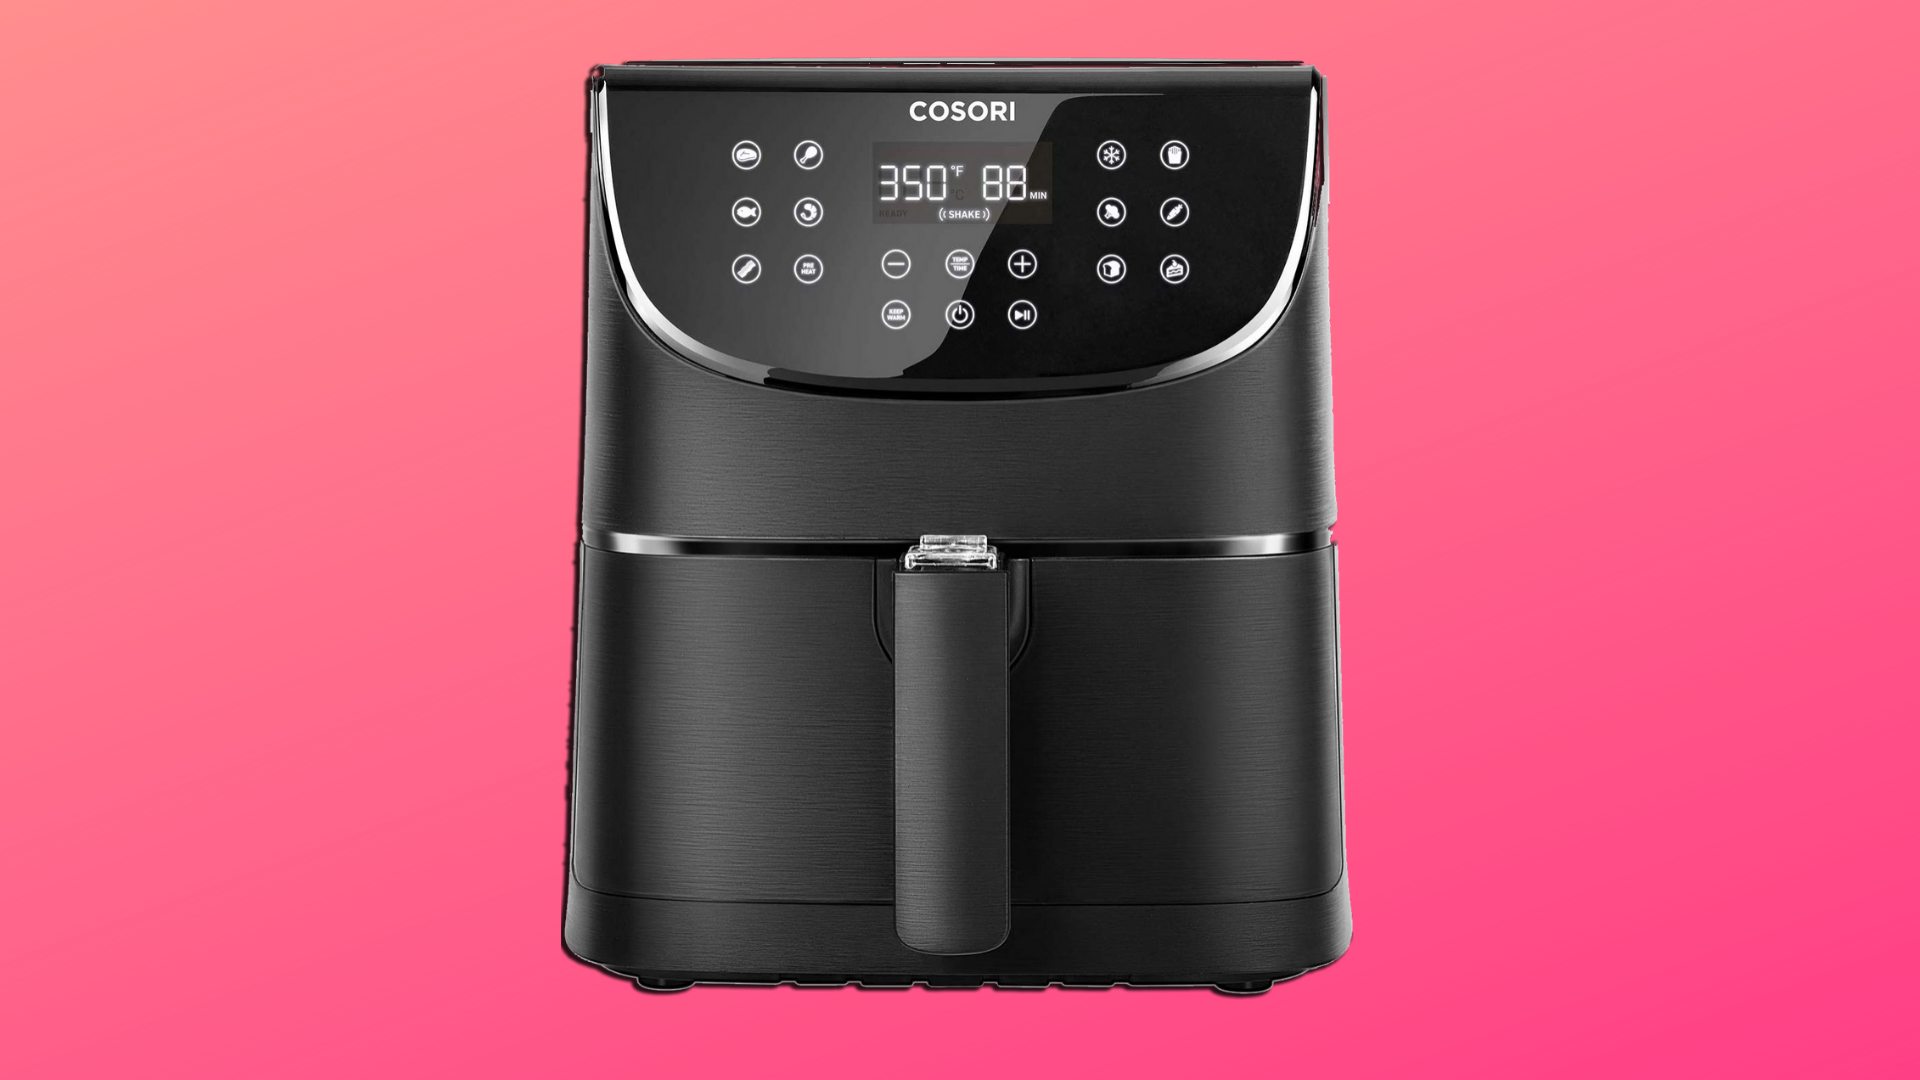 CosorI Smart WiFi Air Fryer is on sale for $20 off at Amazon